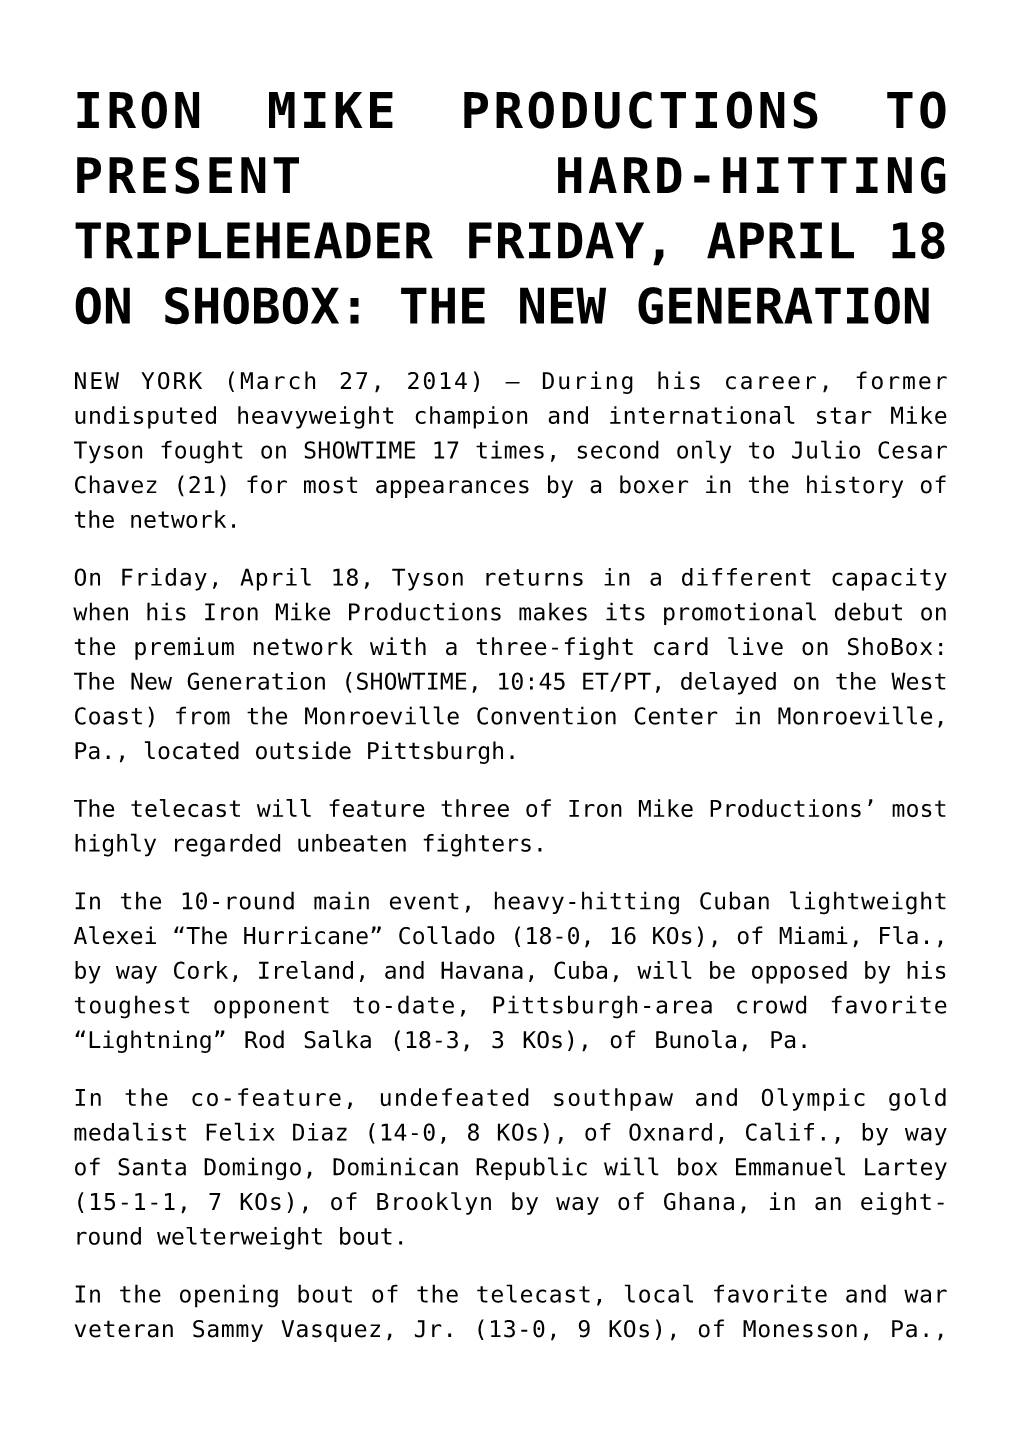 Iron Mike Productions to Present Hard-Hitting Tripleheader Friday, April 18 on Shobox: the New Generation